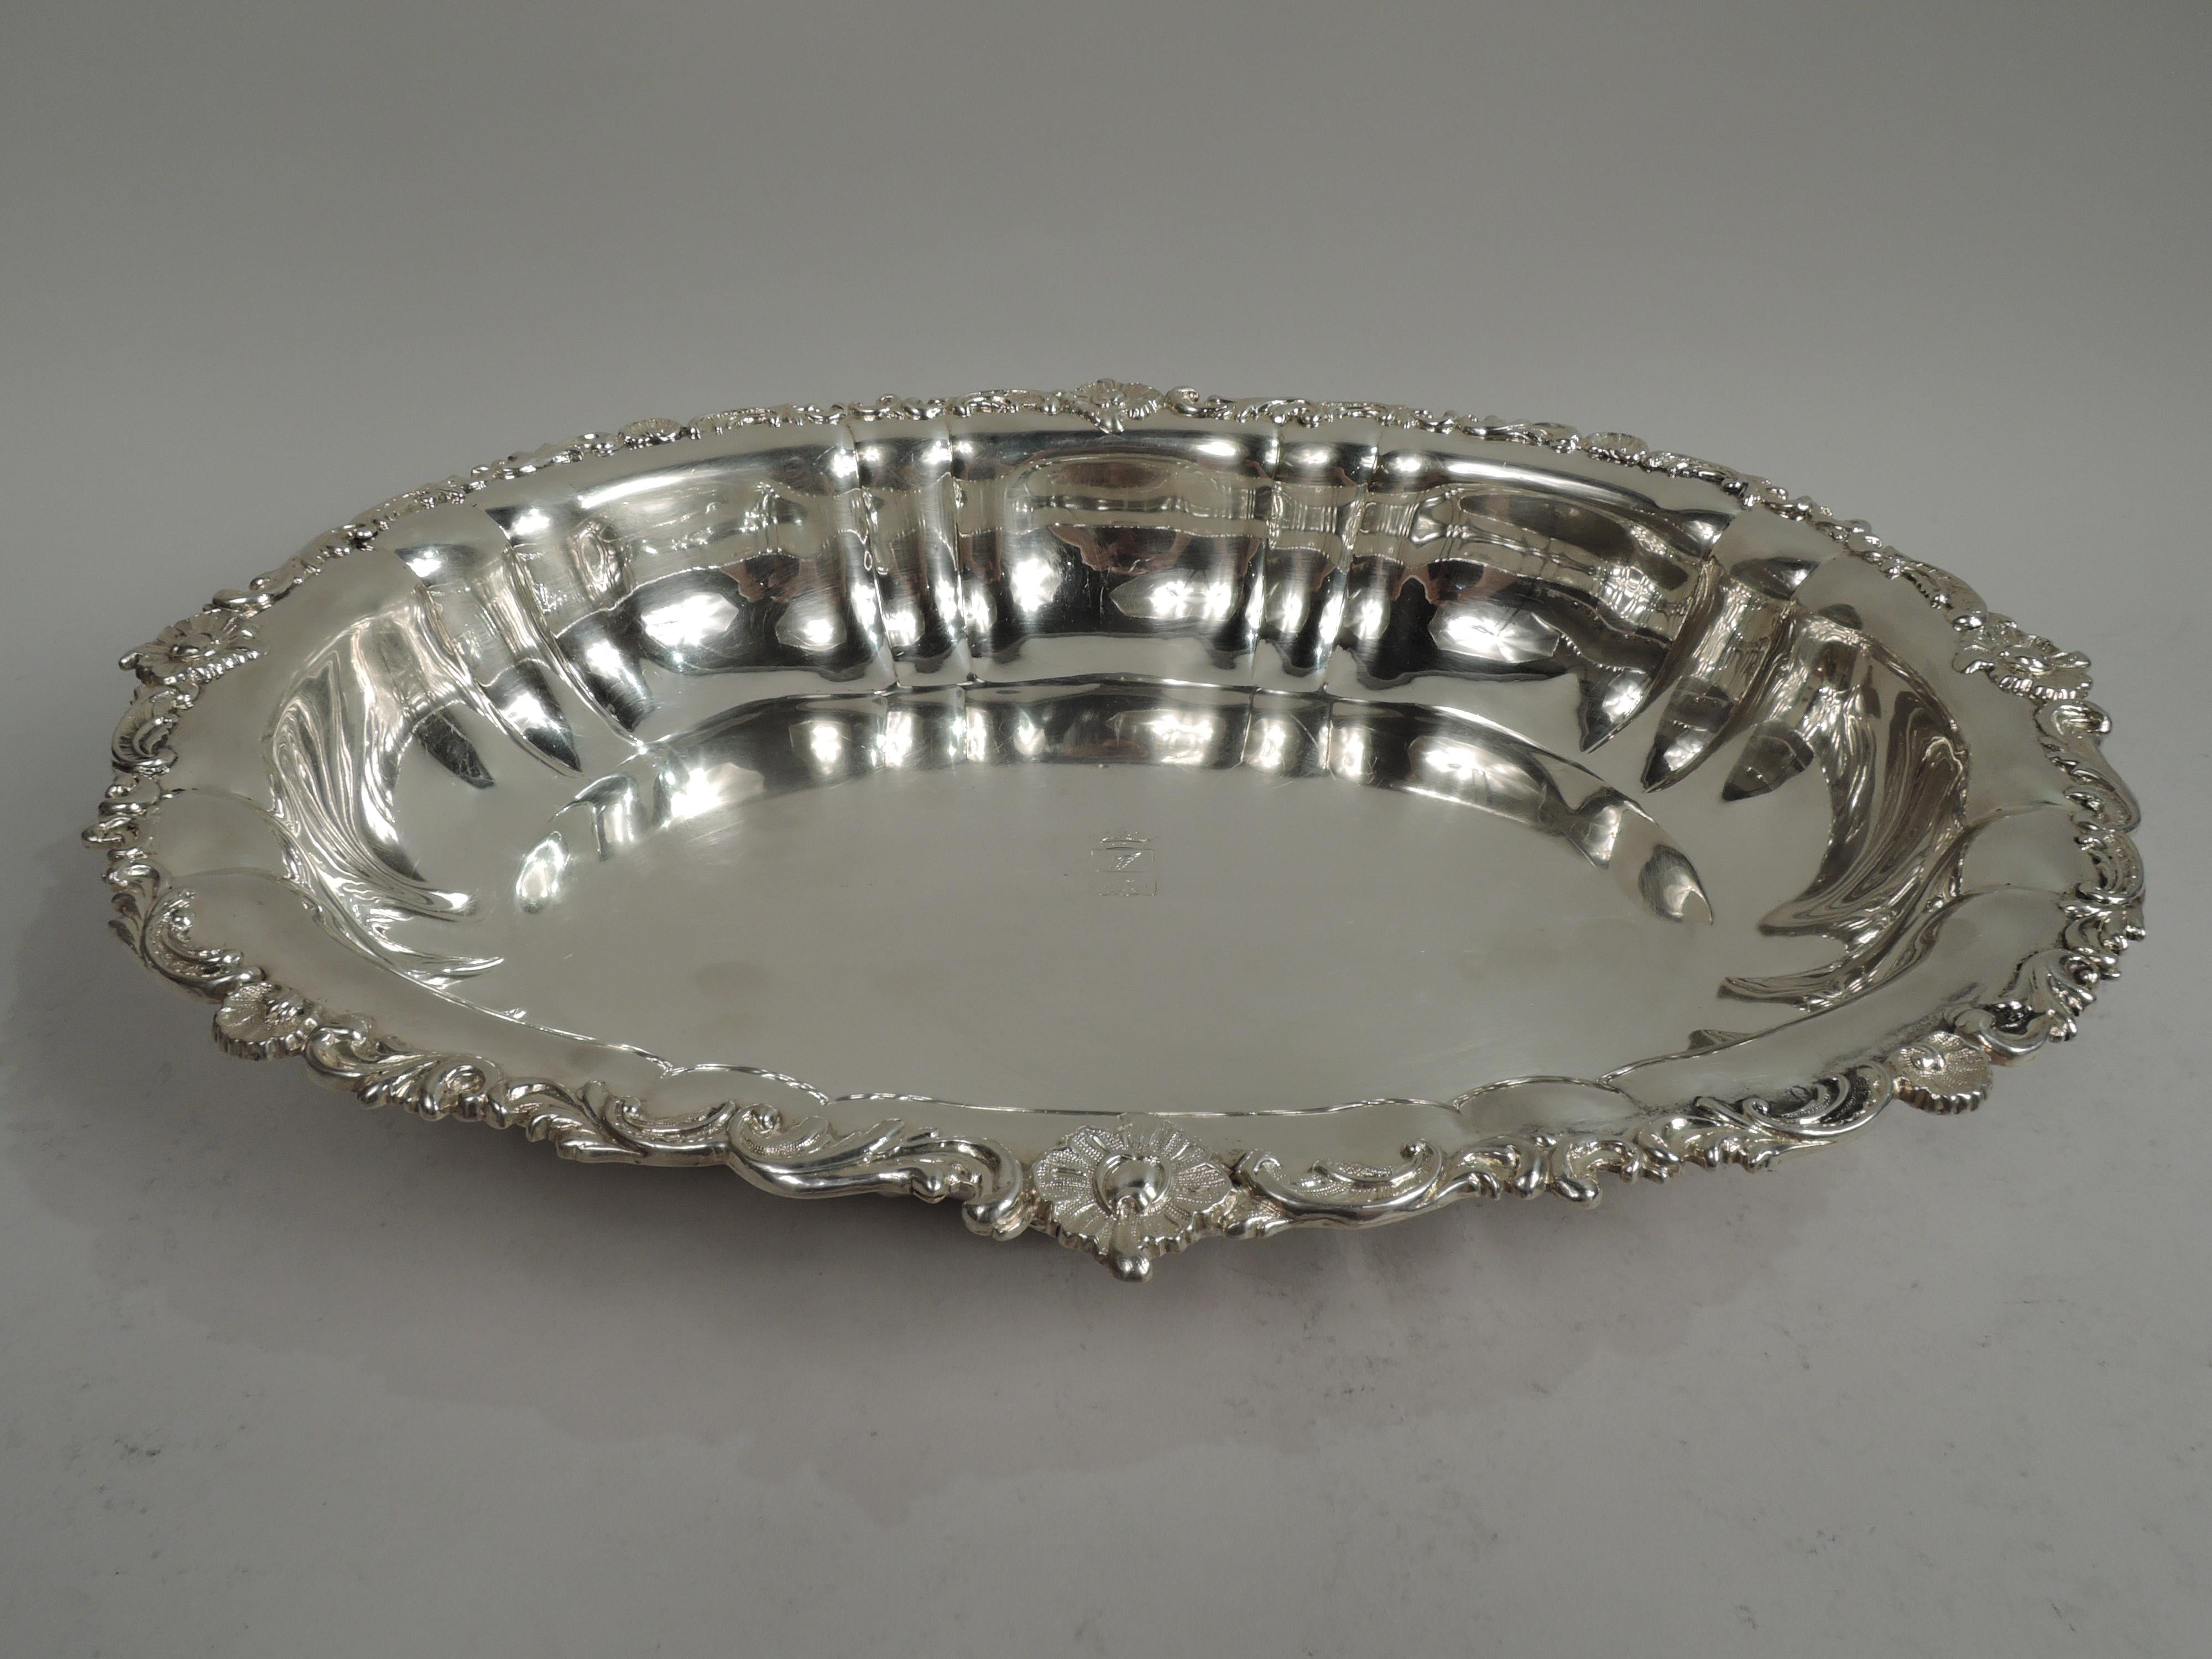 Large Russian Classical 875 silver bowl, ca 1843. Oval well with engraved armorial and curved and fluted sides with applied scroll and shell armorials (vacant). Rim has applied leaves, scrolls, and scallop shells. Fully marked including Adolf Sper